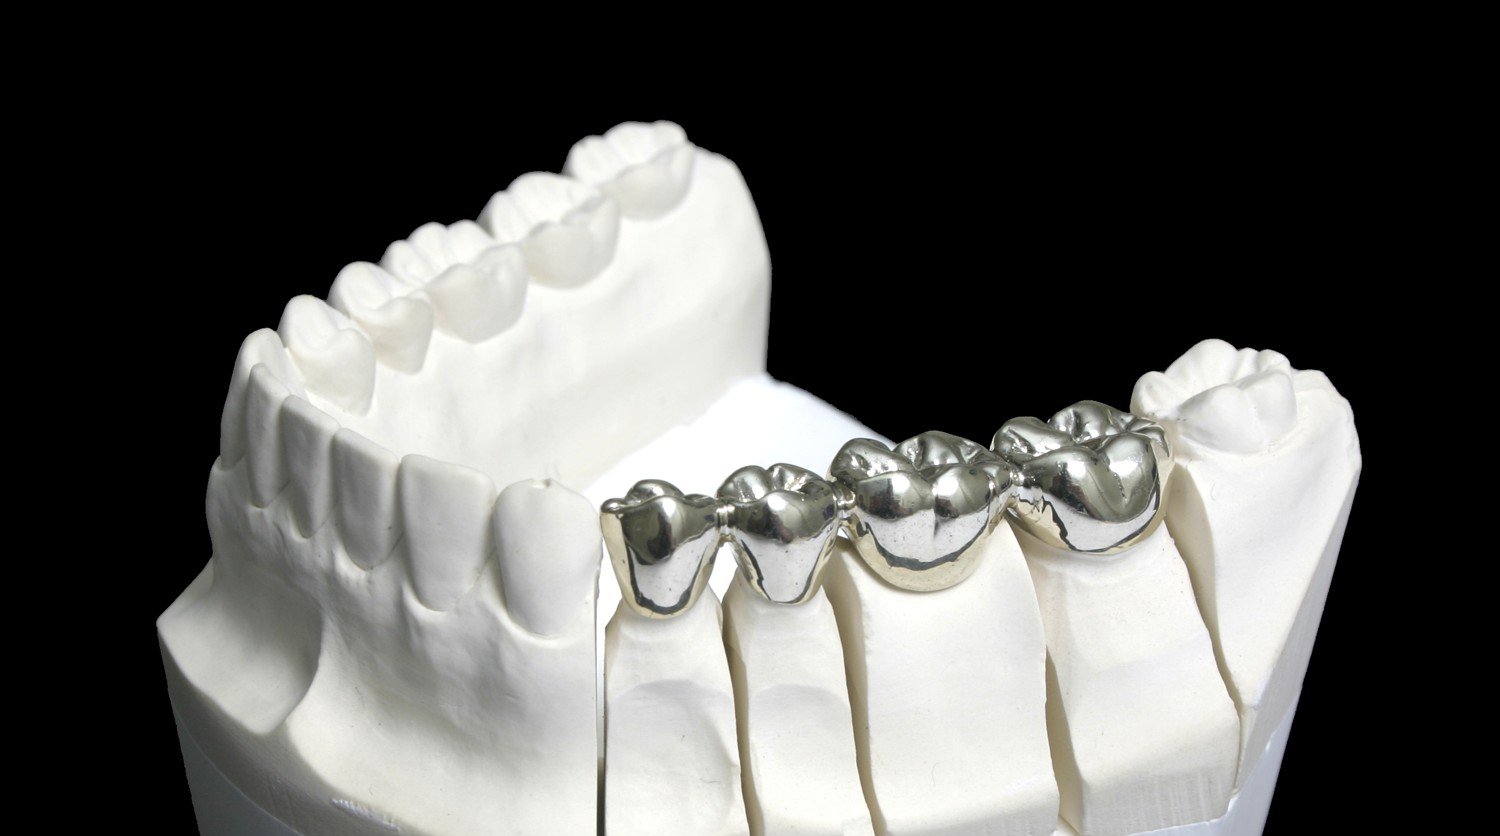 Dental Metal Refiners and Recovery